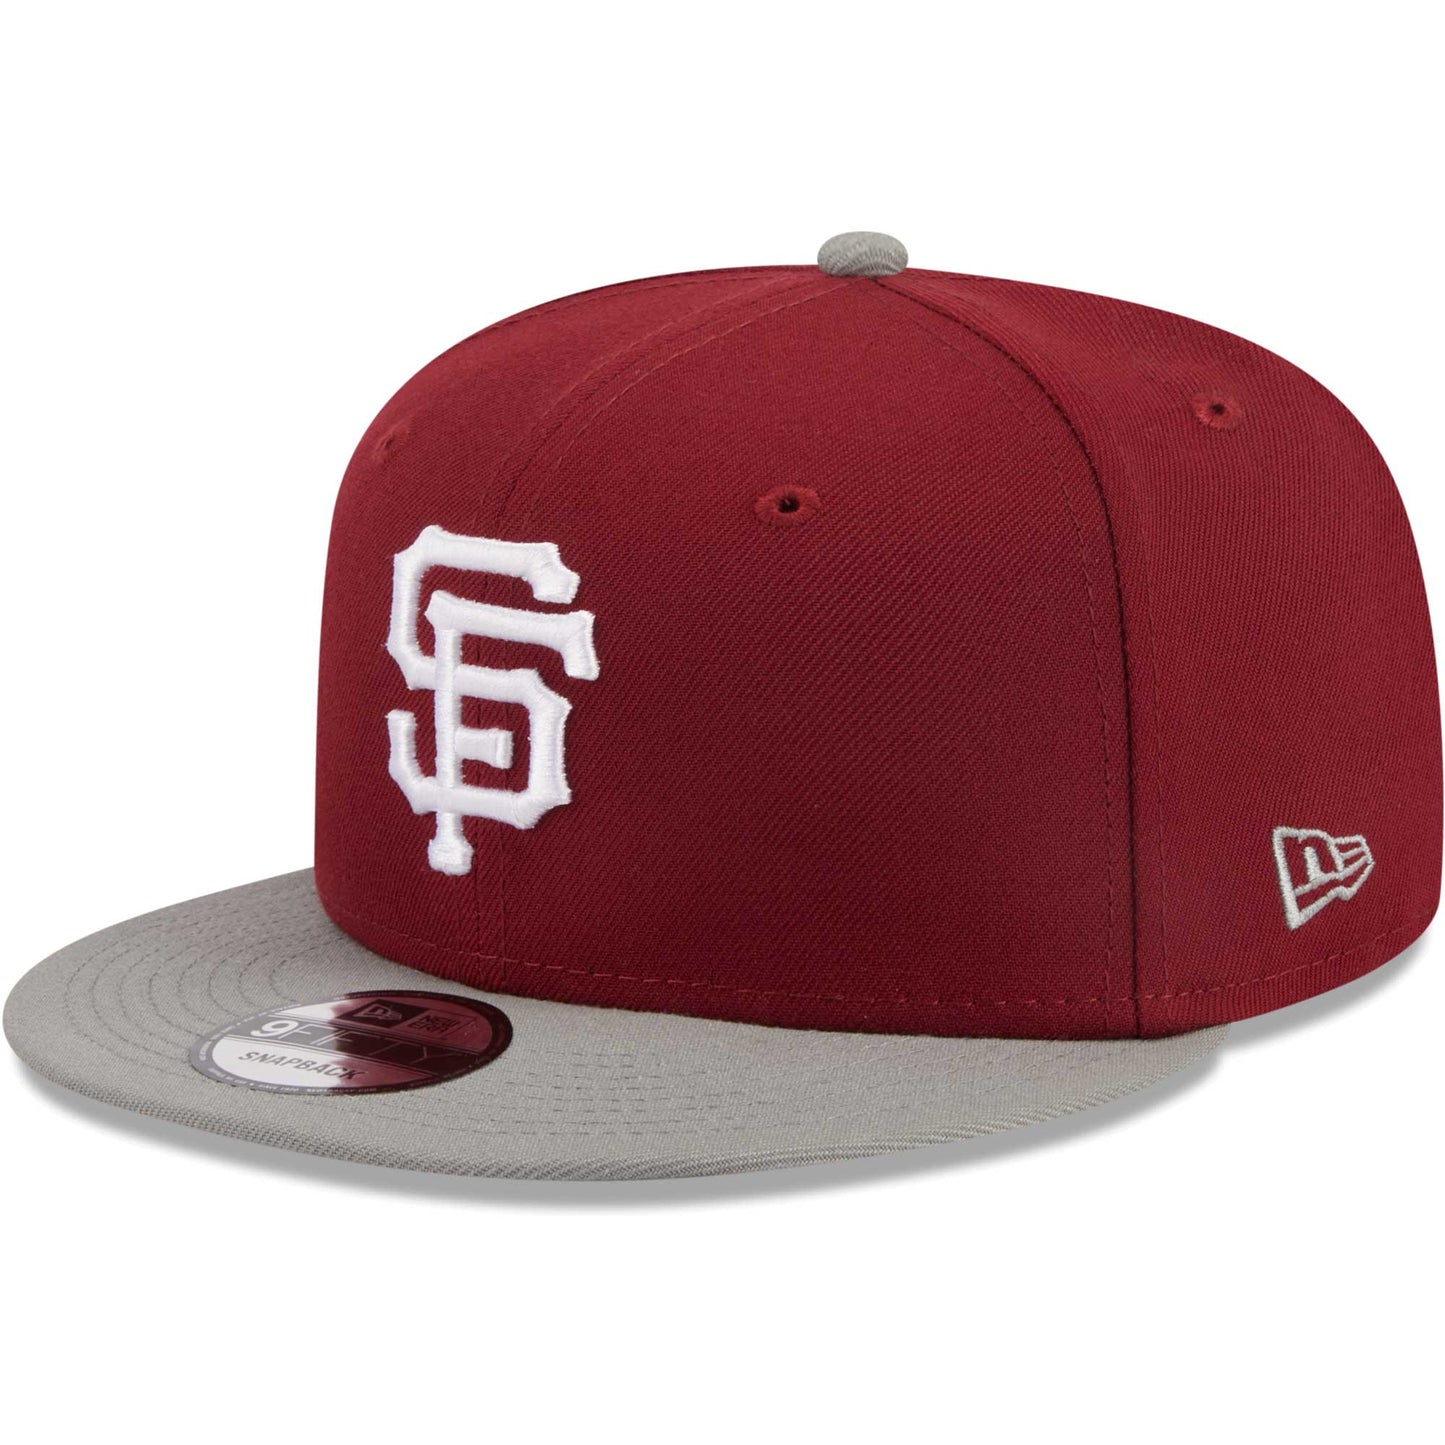 San Francisco Giants New Era Two-Tone Color Pack 9FIFTY Snapback Hat - Cardinal